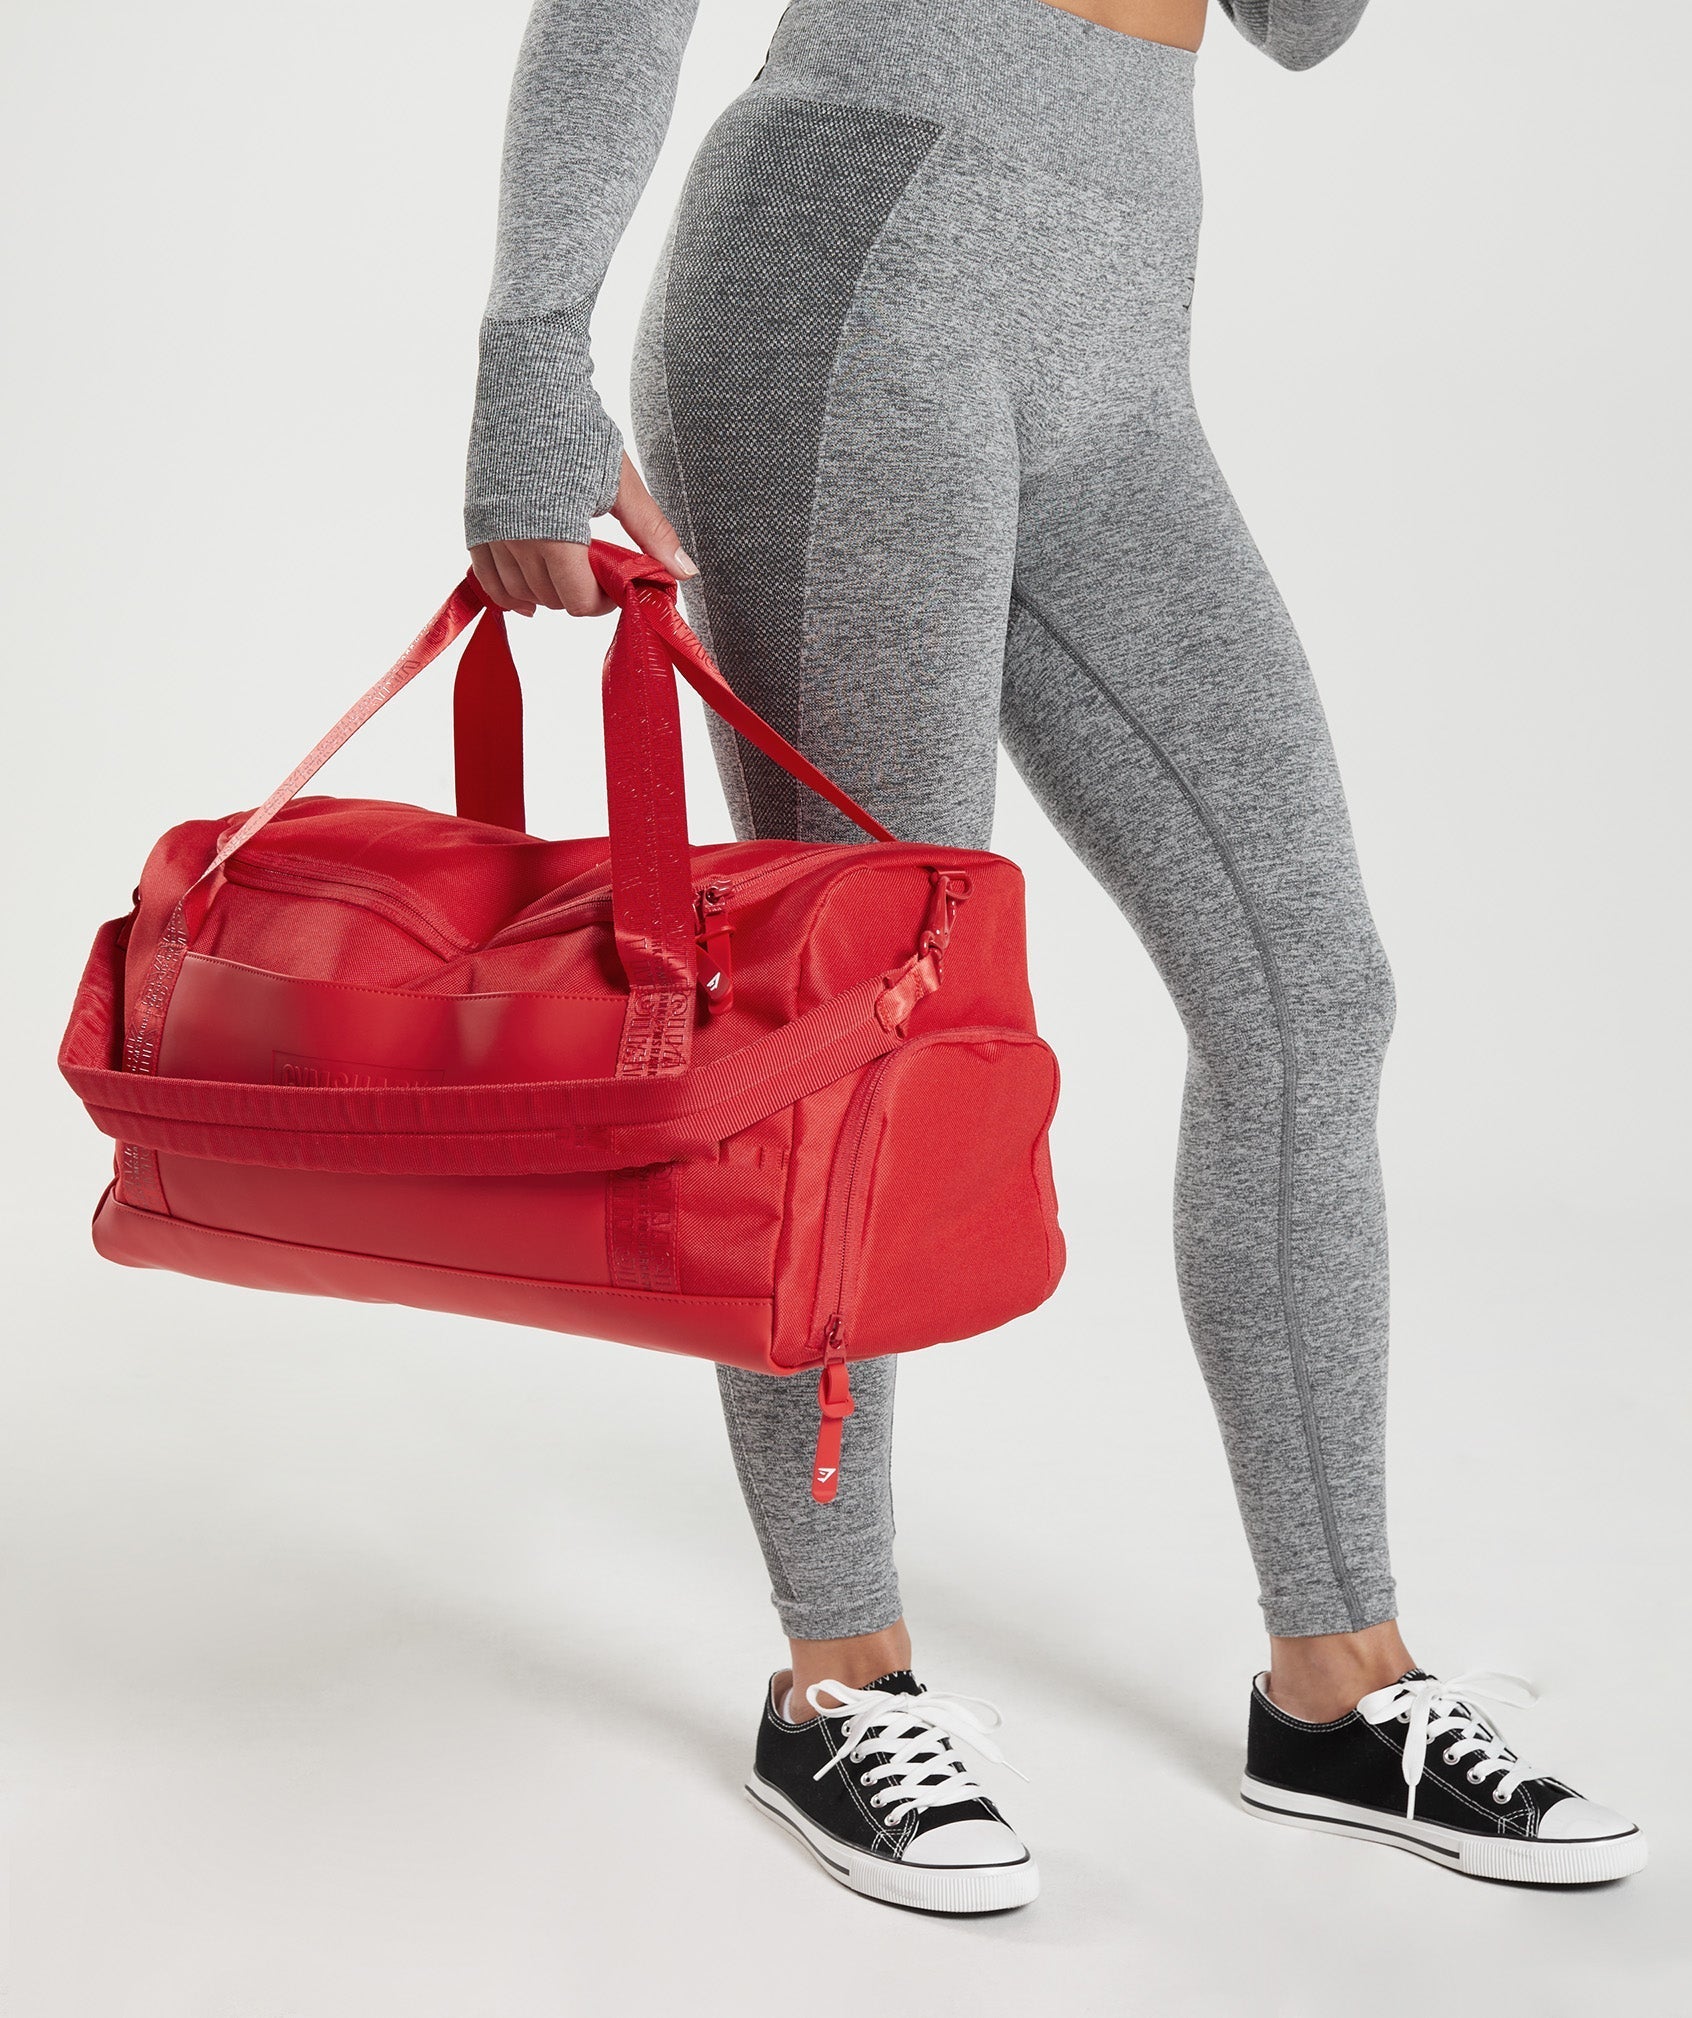 Small Everyday Gym Bag in Chilli Red